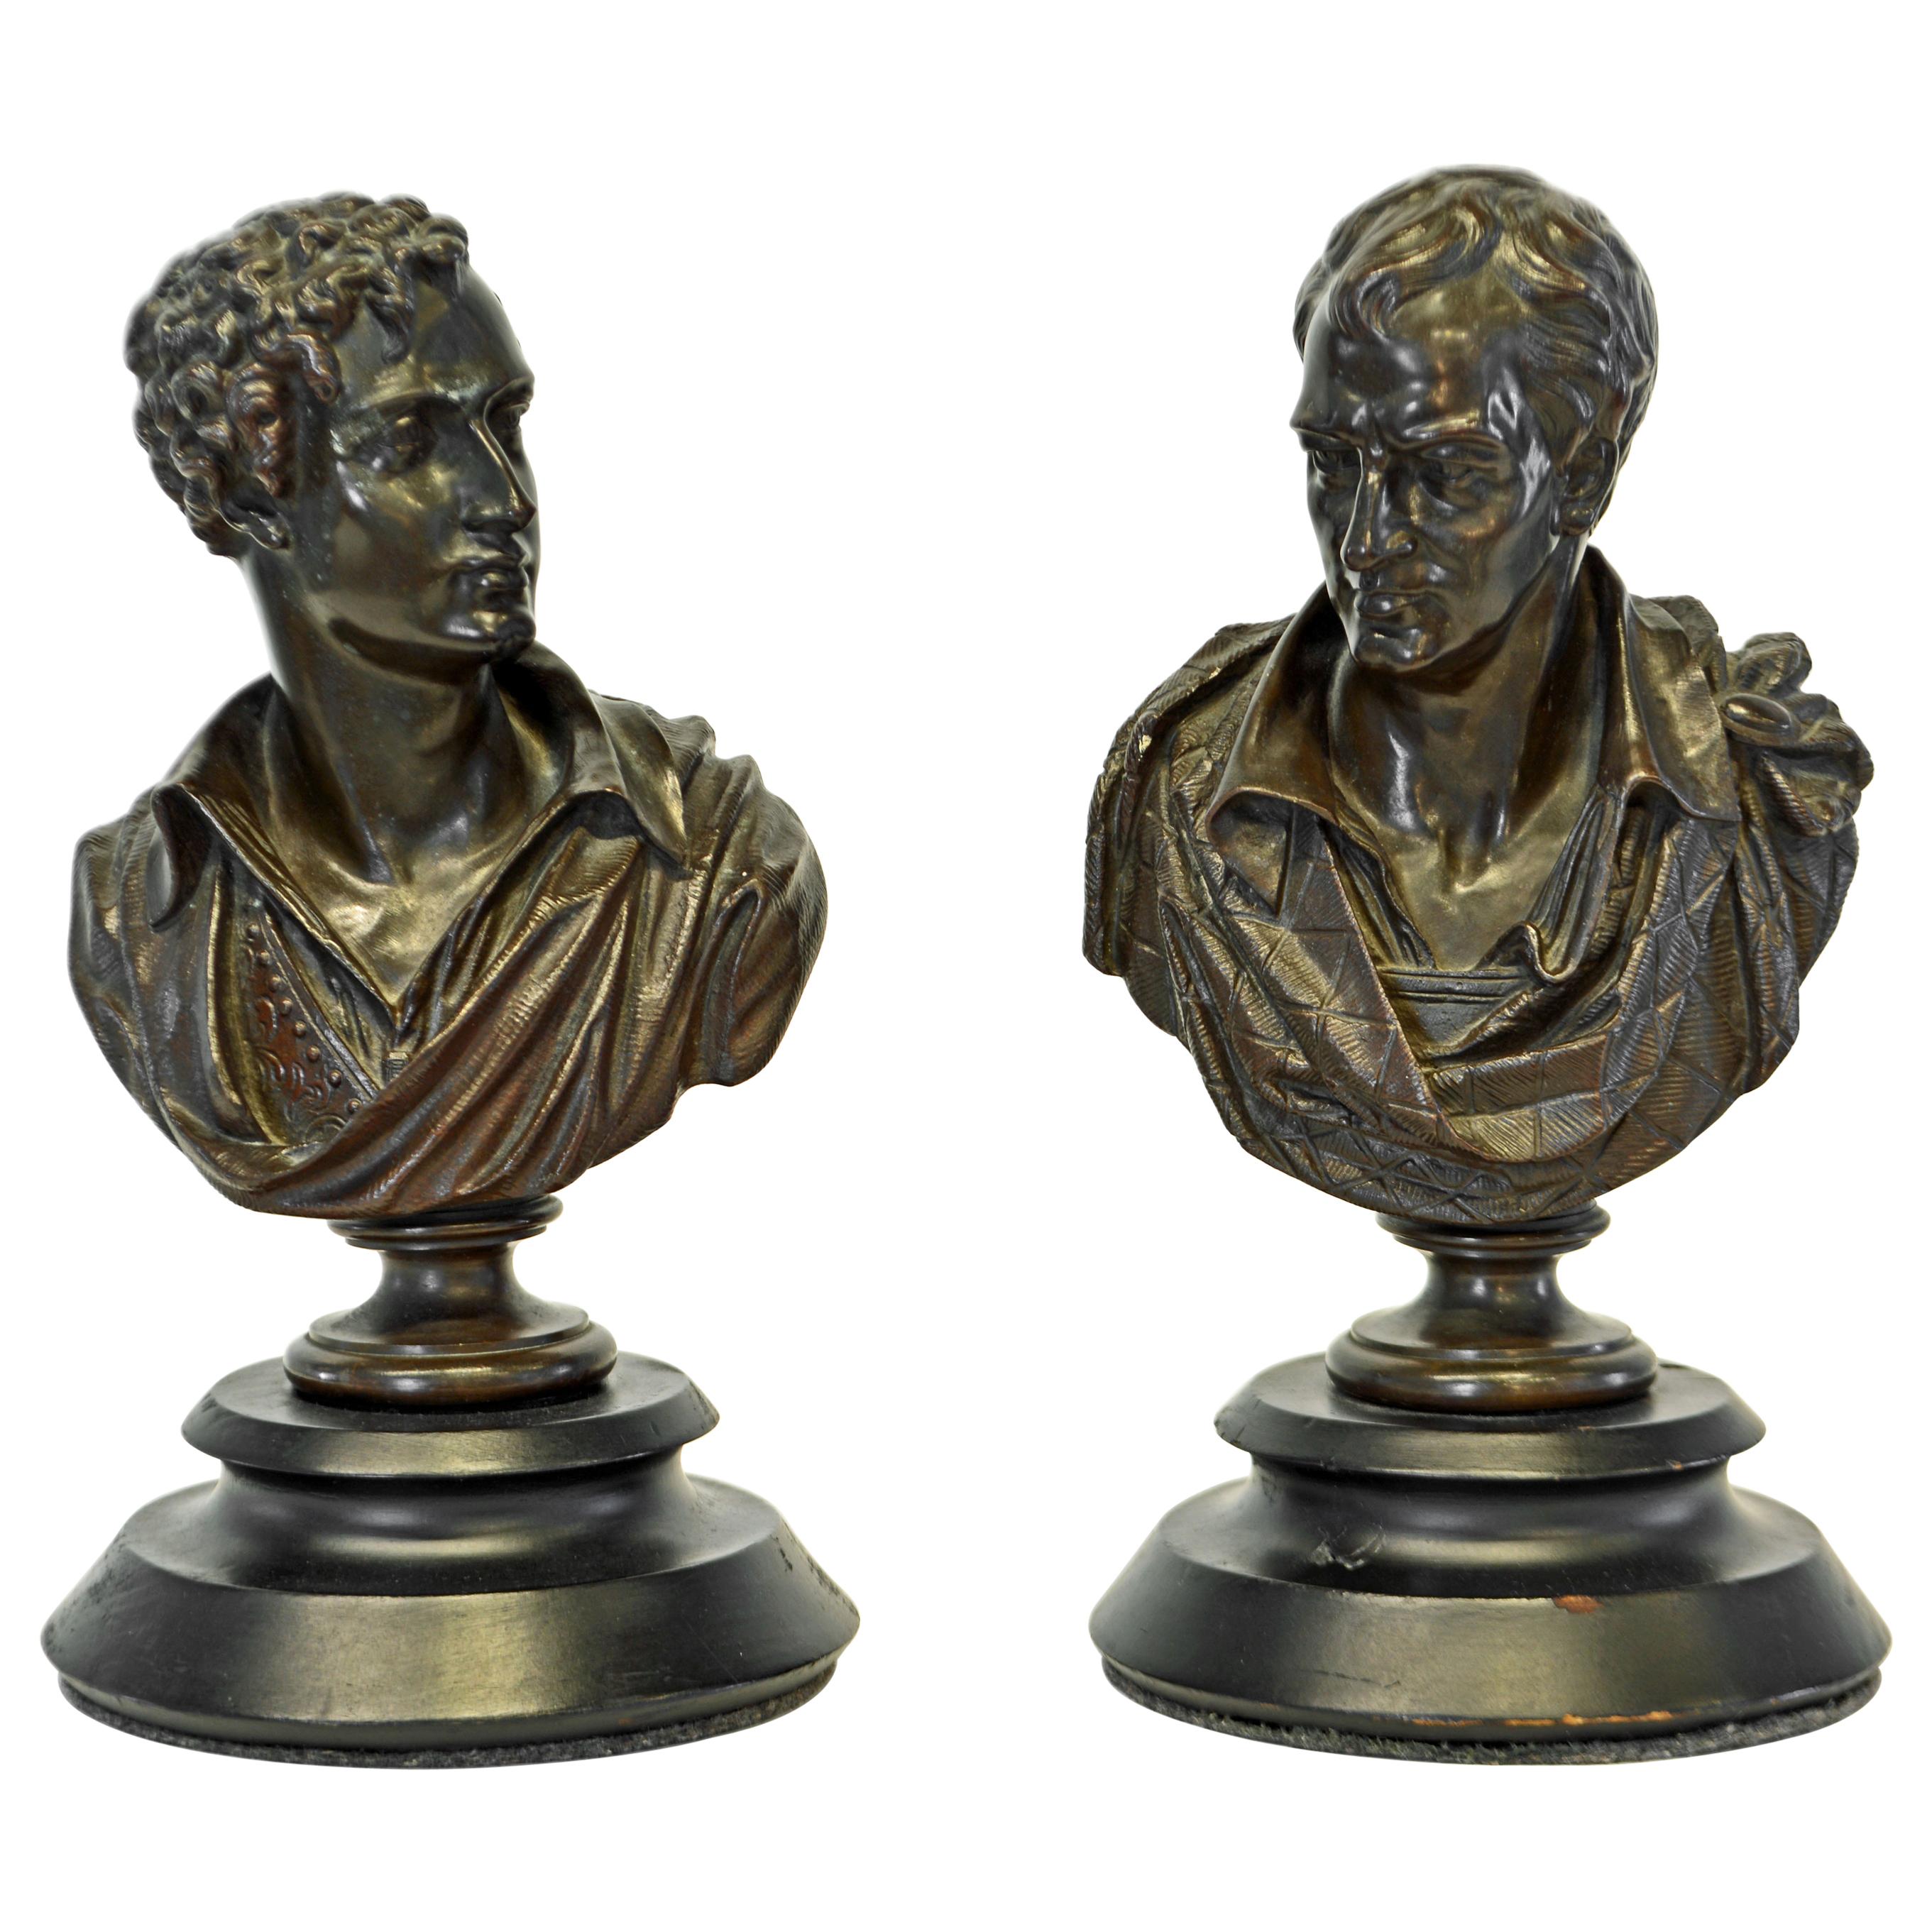 Pair of Literary Bronze Busts of Lord Byron and Sir Walter Scott by E. Hiolle